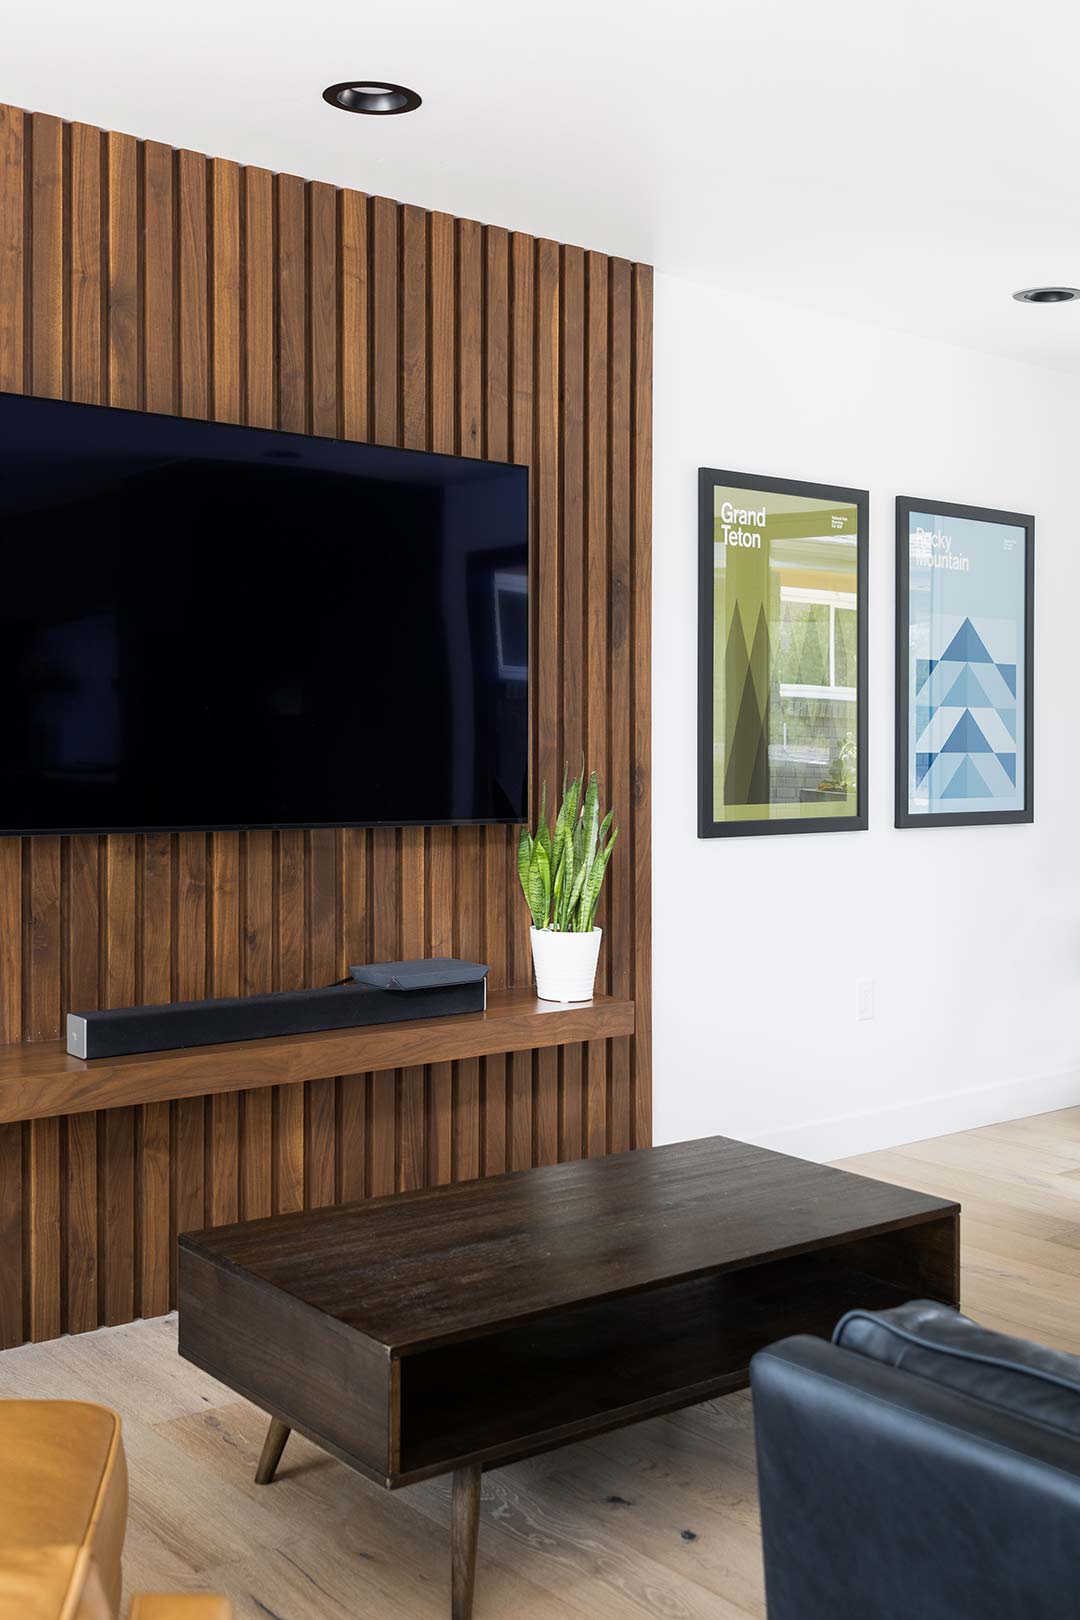 Additional view  of the living rooms custom wood slat feature accent wall behind the tv